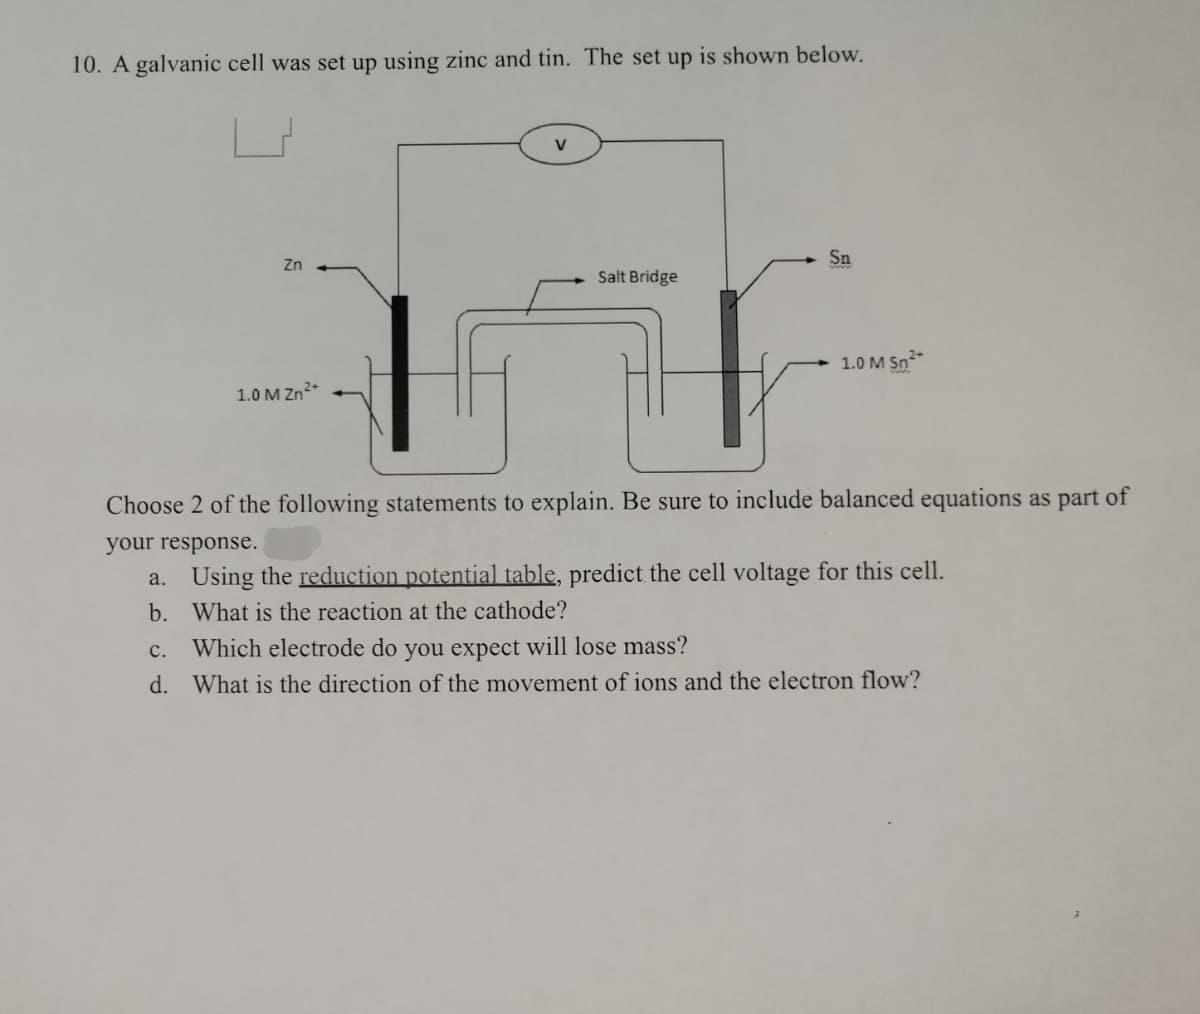 10. A galvanic cell was set up using zinc and tin. The set up is shown below.
Zn
Sn
Salt Bridge
1.0 M Sn²+
1.0 M Zn²+
Choose 2 of the following statements to explain. Be sure to include balanced equations as part of
your response.
a. Using the reduction potential table, predict the cell voltage for this cell.
b.
What is the reaction at the cathode?
c.
Which electrode do you expect will lose mass?
d. What is the direction of the movement of ions and the electron flow?